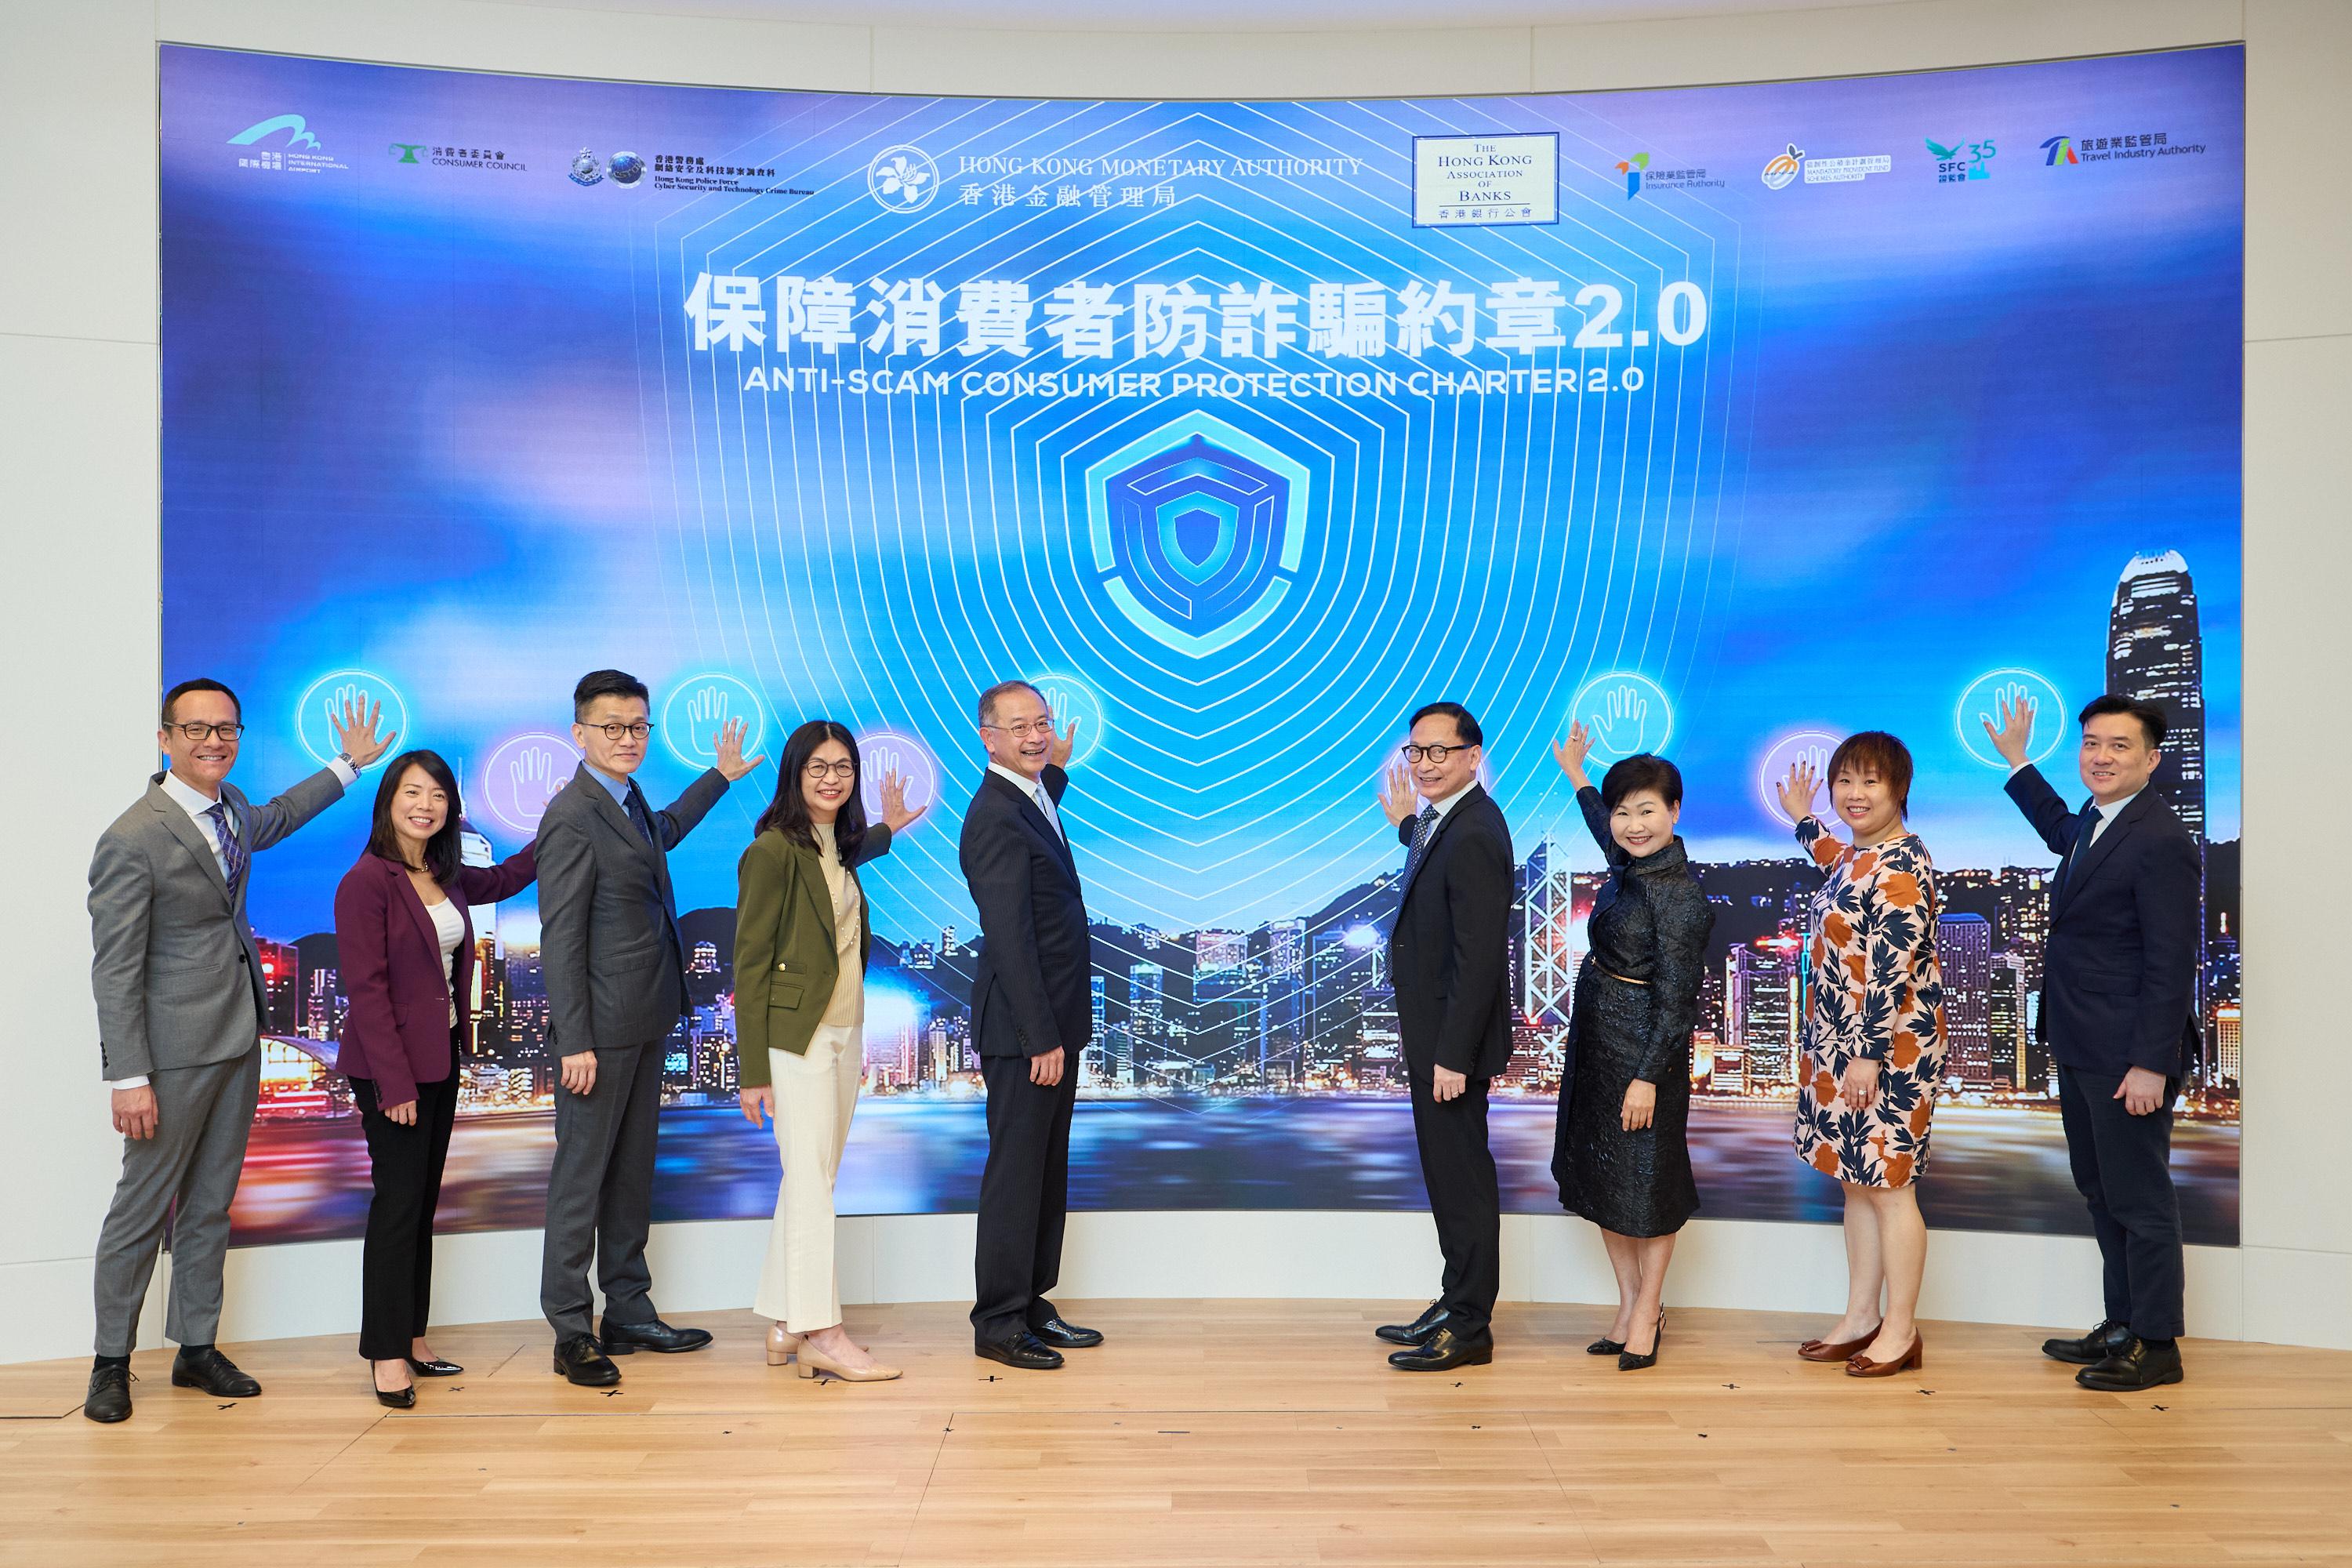 The Chief Executive of the Hong Kong Monetary Authority, Mr Eddie Yue (fifth left); the Chairman of the Hong Kong Association of Banks and Chief Executive Officer, Hong Kong, HSBC, Ms Luanne Lim (second left); the Executive Director of Finance of the Airport Authority, Mr Julian Lee (first right); the Chief Executive of the Consumer Council, Ms Gilly Wong (third right); the Chief Superintendent of Police of the Cyber Security and Technology Crime Bureau of the Hong Kong Police Force, Mr Raymond Lam (first left); the Chief Executive Officer of the Insurance Authority, Mr Clement Cheung (fourth right); the Managing Director of the Mandatory Provident Fund Schemes Authority, Mr Cheng Yan-chee (third left); the Chief Executive Officer of the Securities and Futures Commission, Ms Julia Leung (fourth left) and the Director of Corporate Services of the Travel Industry Authority, Ms Venus Wu (second right) participated in the ceremony of the Anti-Scam Consumer Protection Charter 2.0 event, symbolising the joint efforts of different sectors to help the public to guard against credit card scams and other digital frauds.